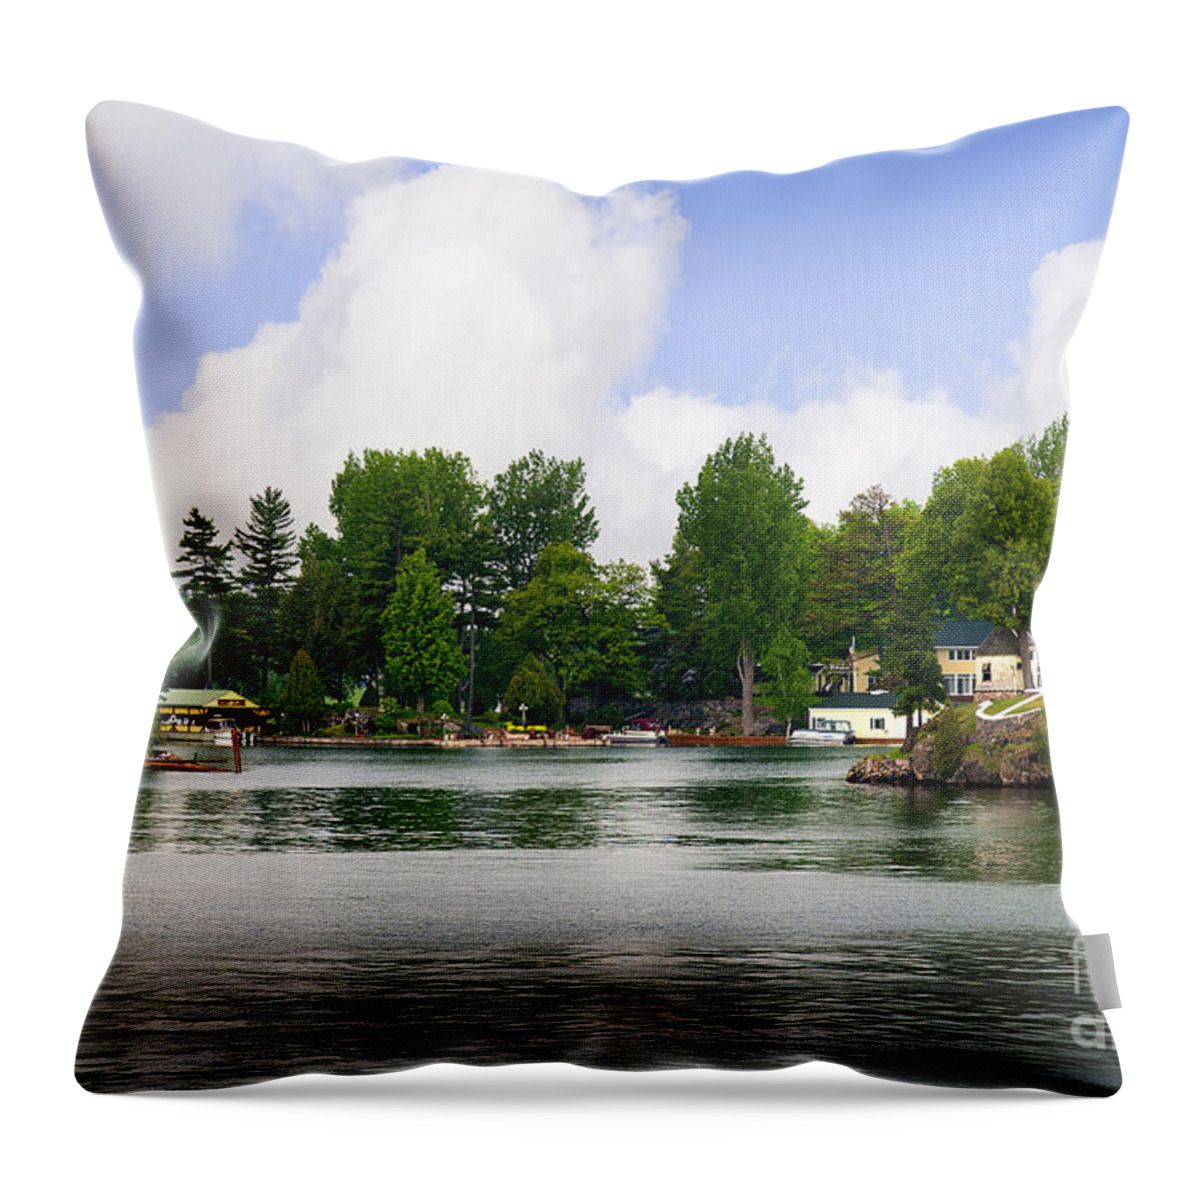 Canada Throw Pillow featuring the photograph 1000 Islands Homes by Brenda Kean